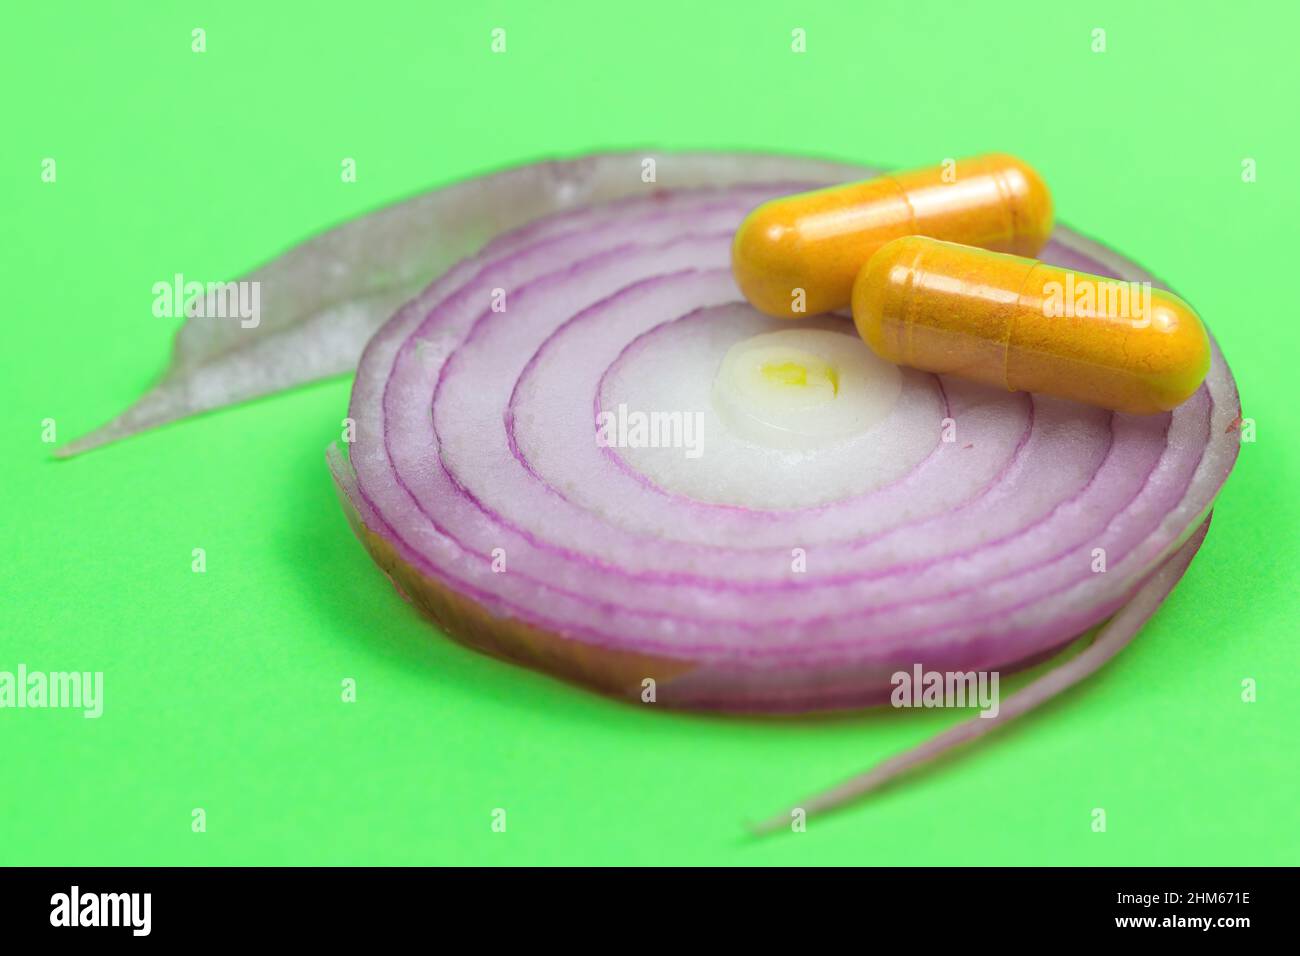 Natural medicine concept, pills on top of onion slice Stock Photo